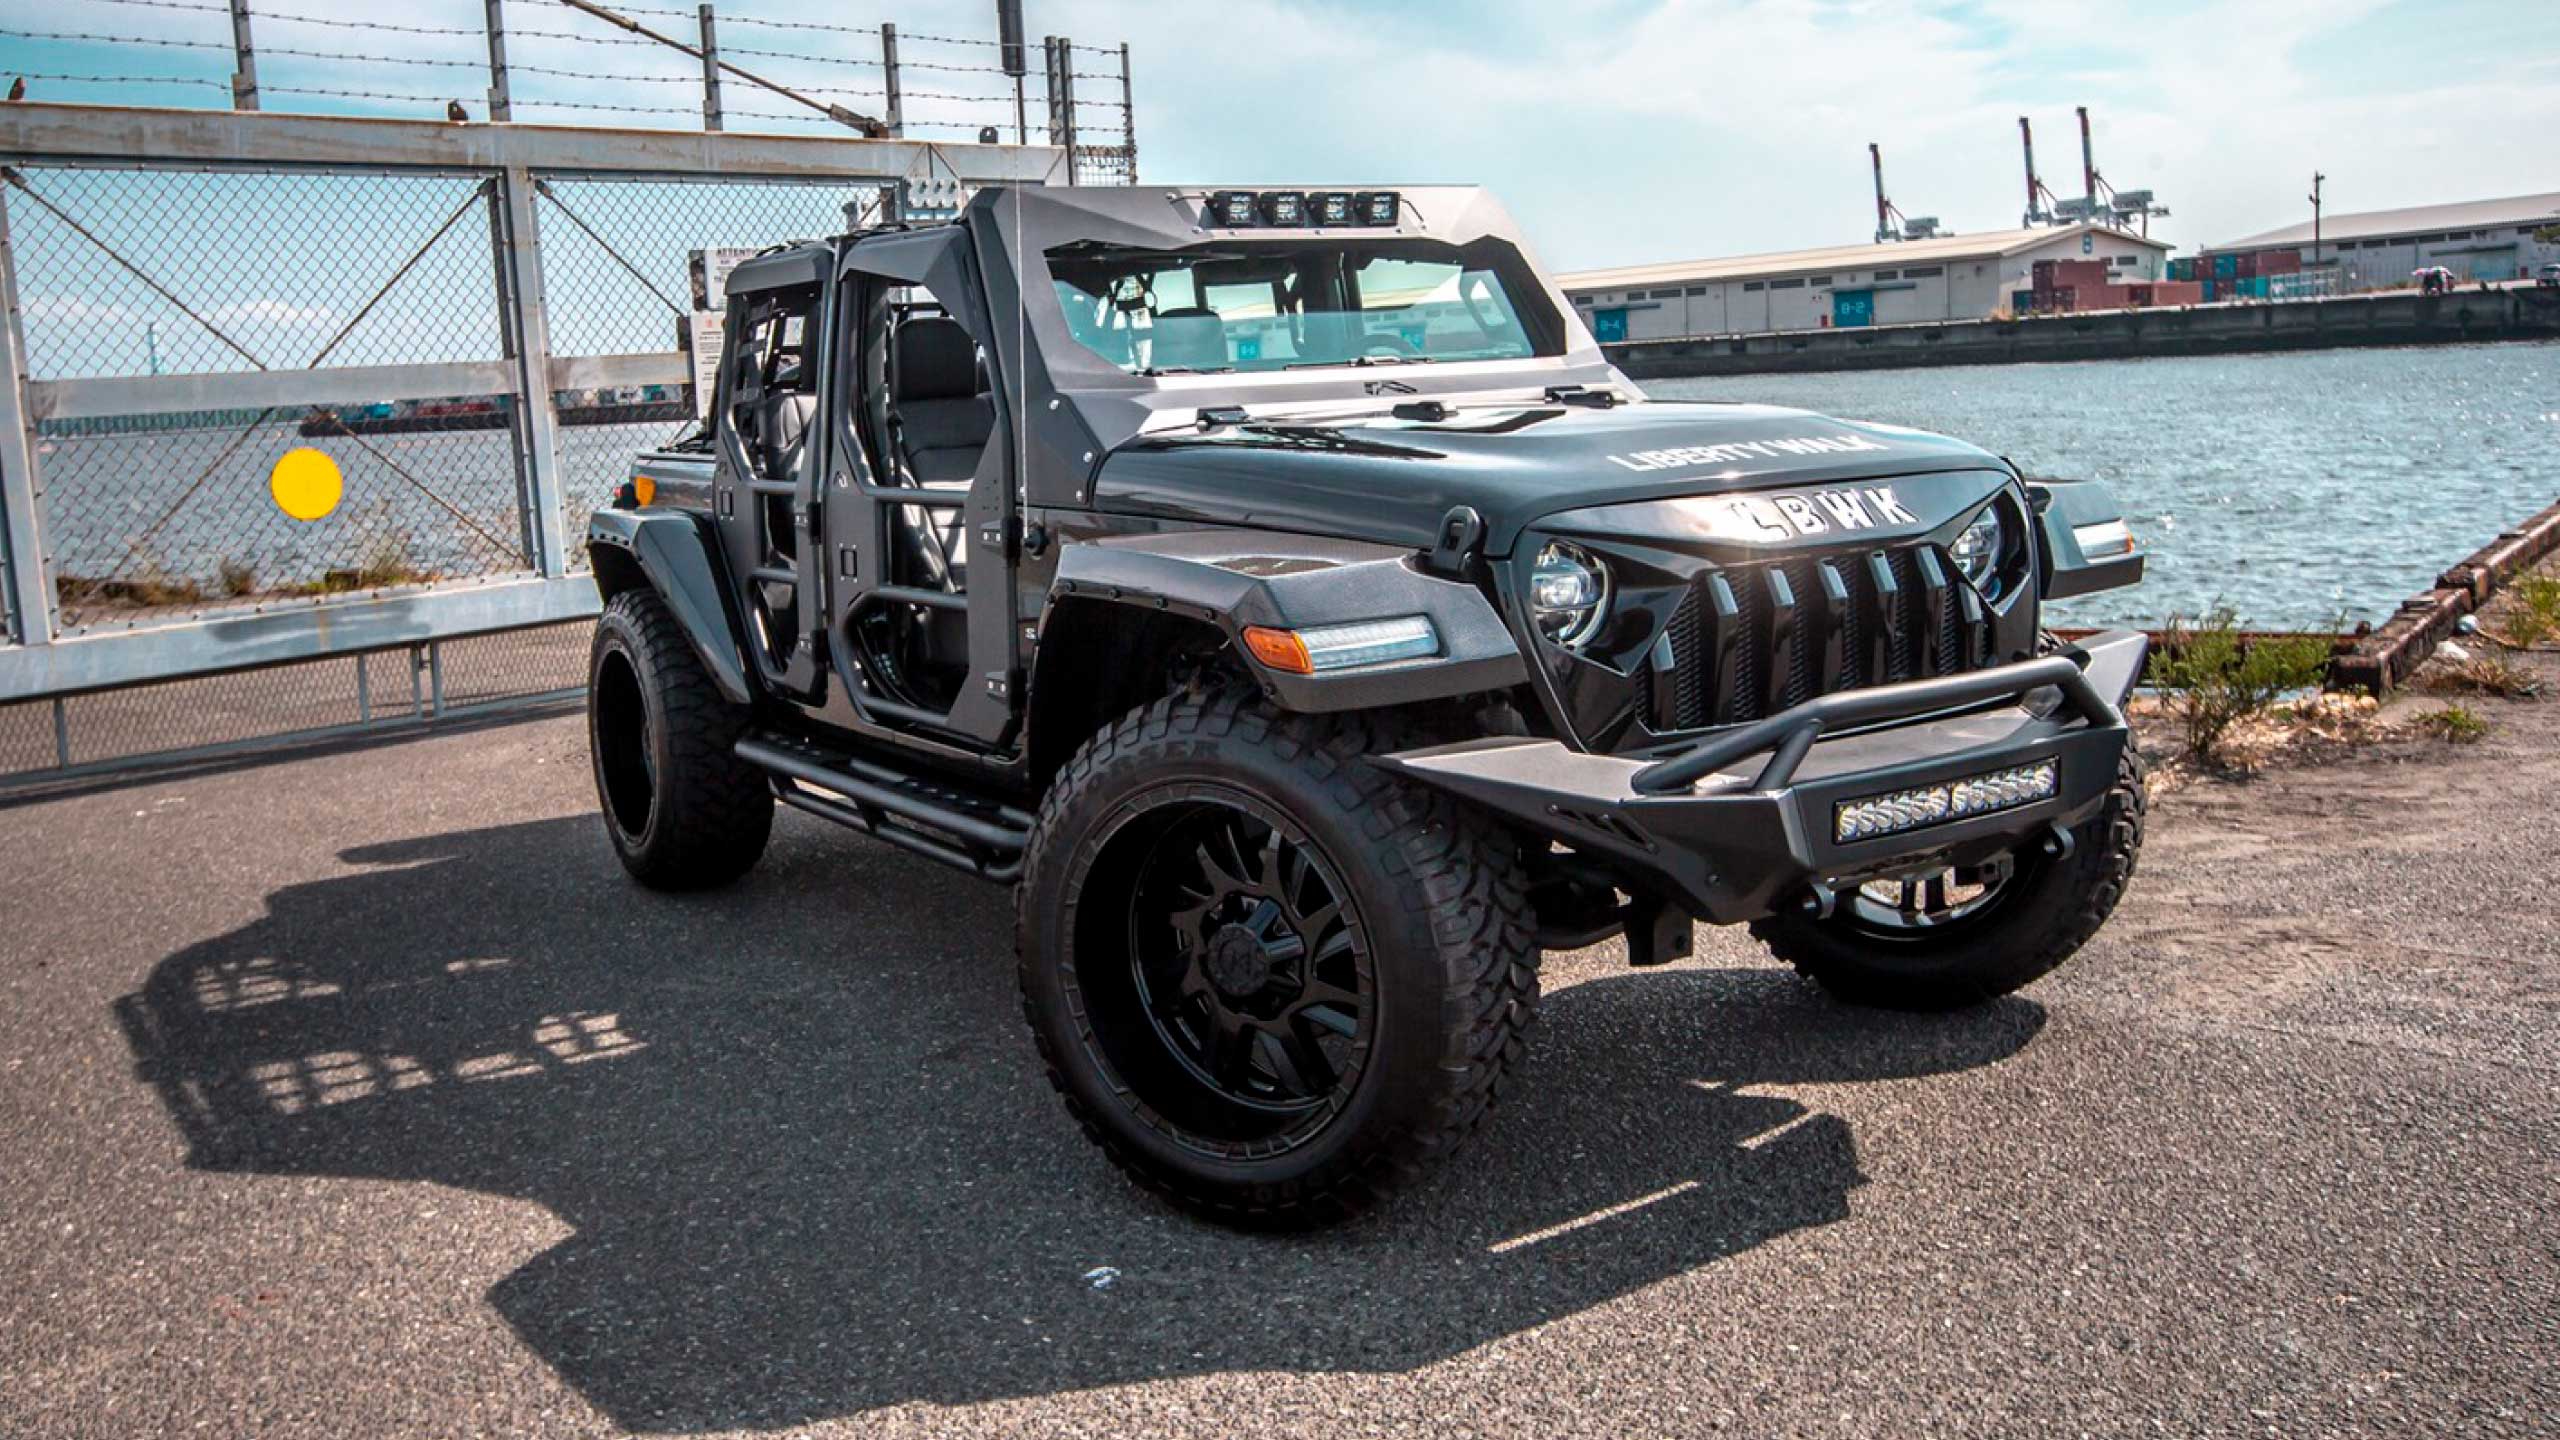 Check our price and buy Liberty Walk body kit for Jeep Wrangler JL!